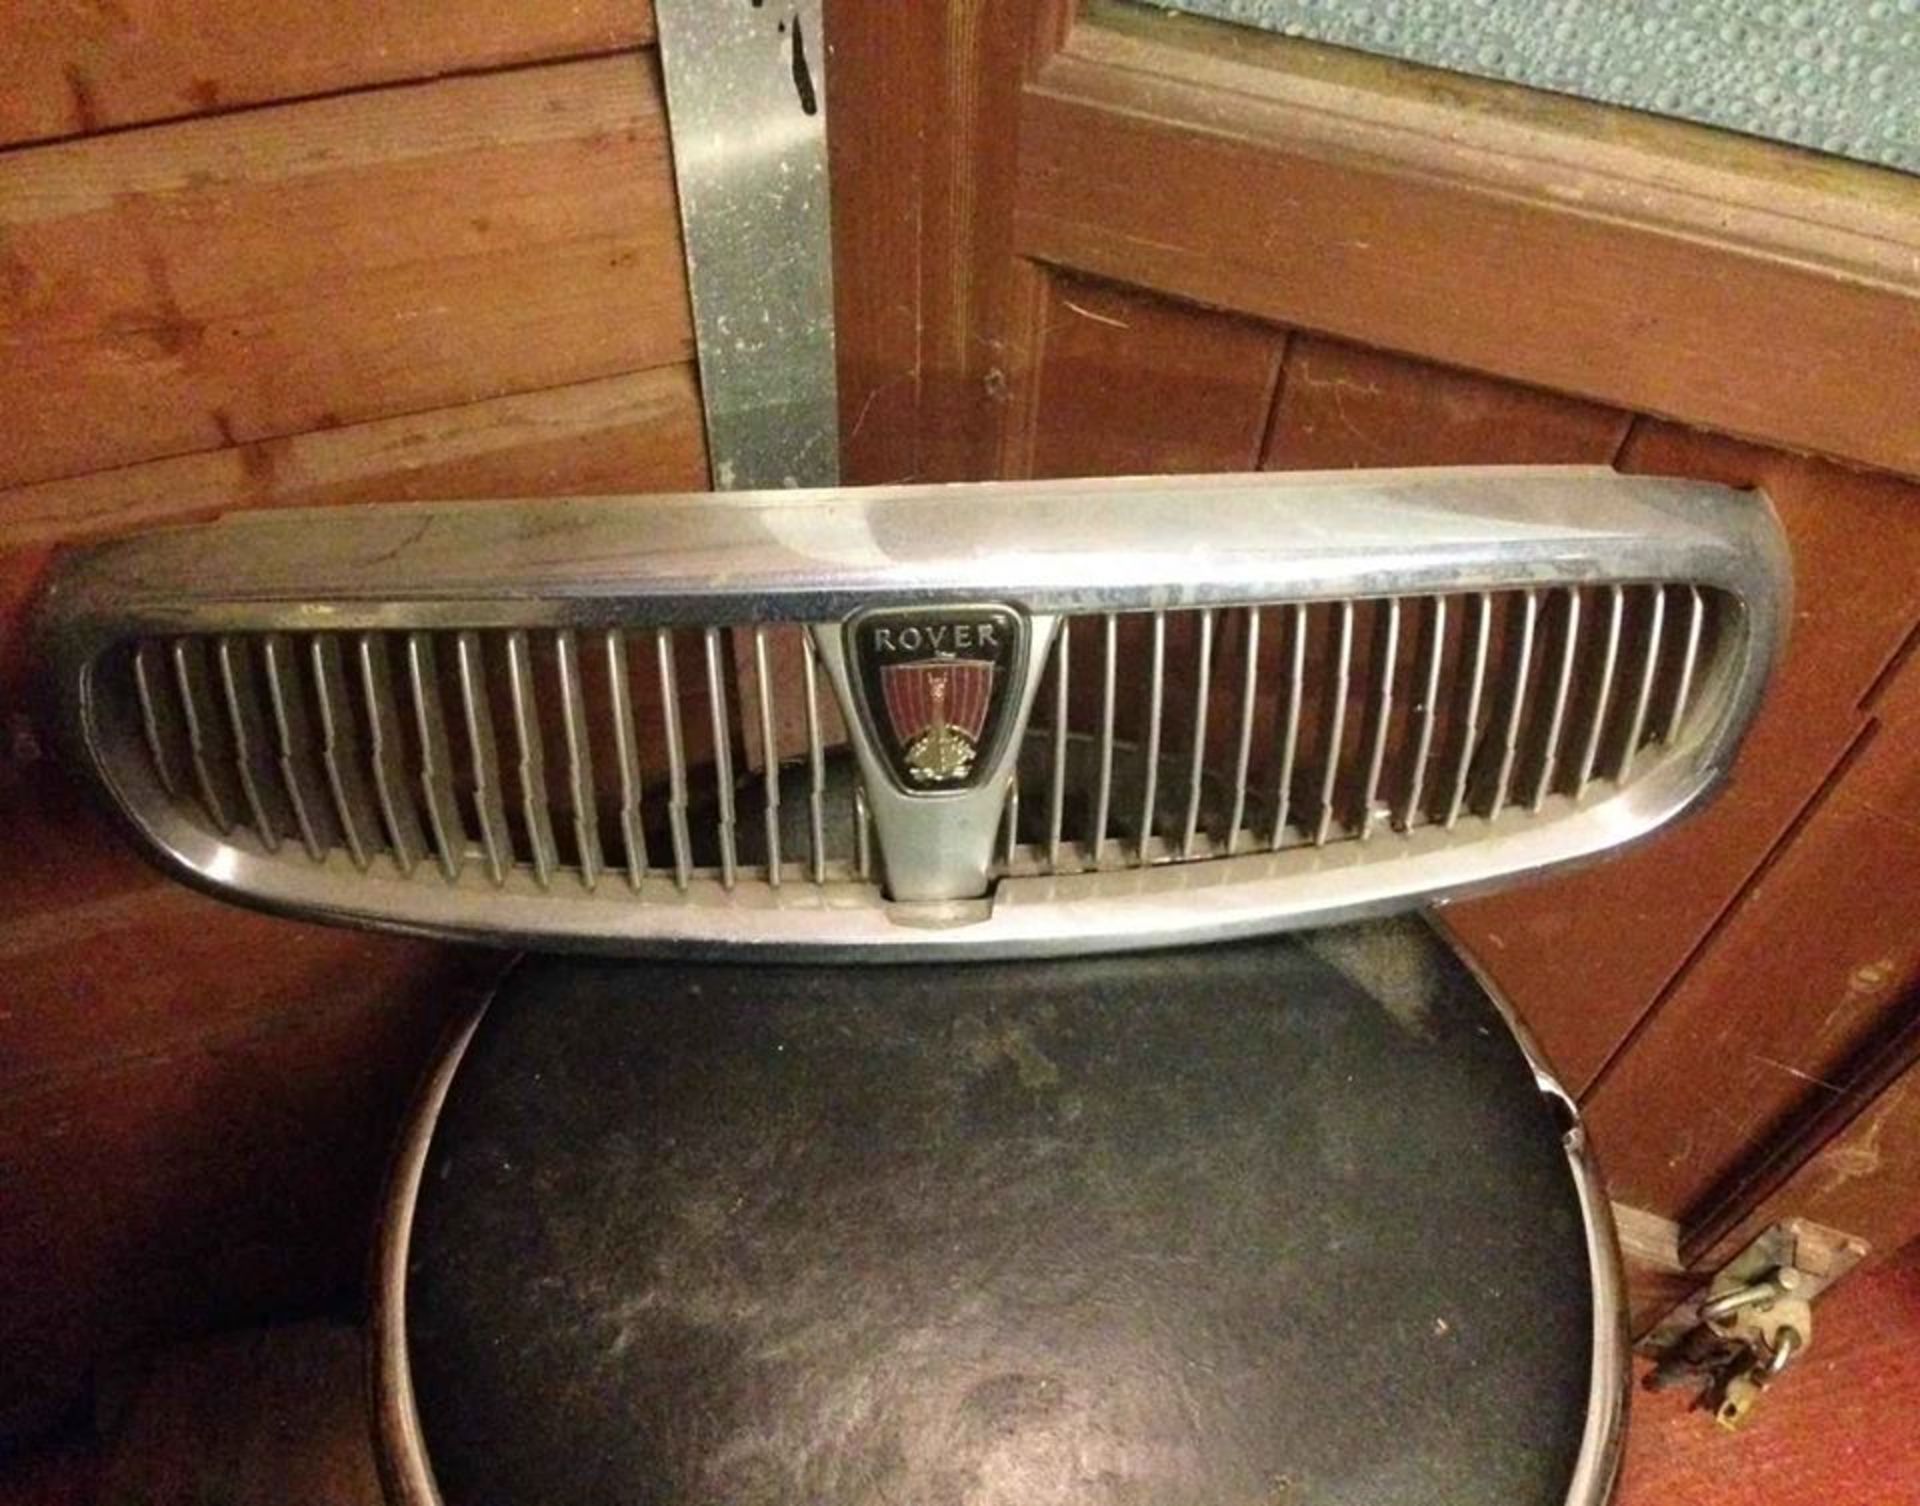 EARLY ROVER GRILL